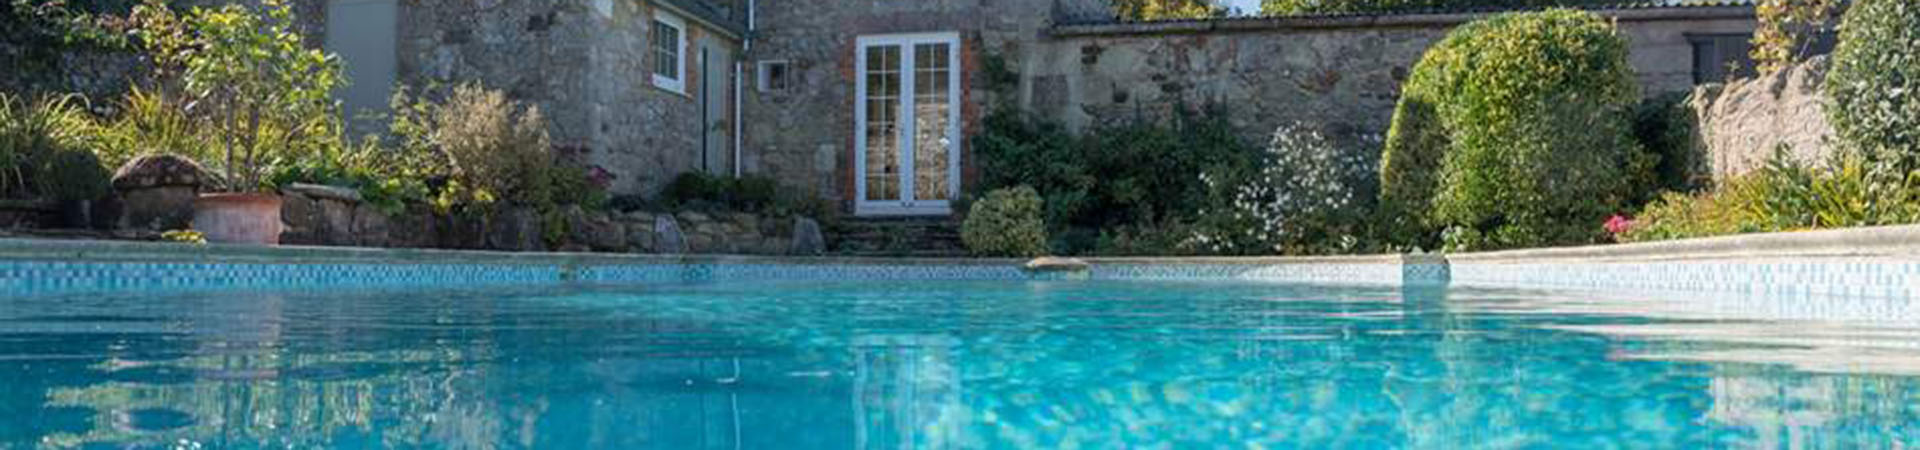 Holiday cottages with pools in Ceredigion